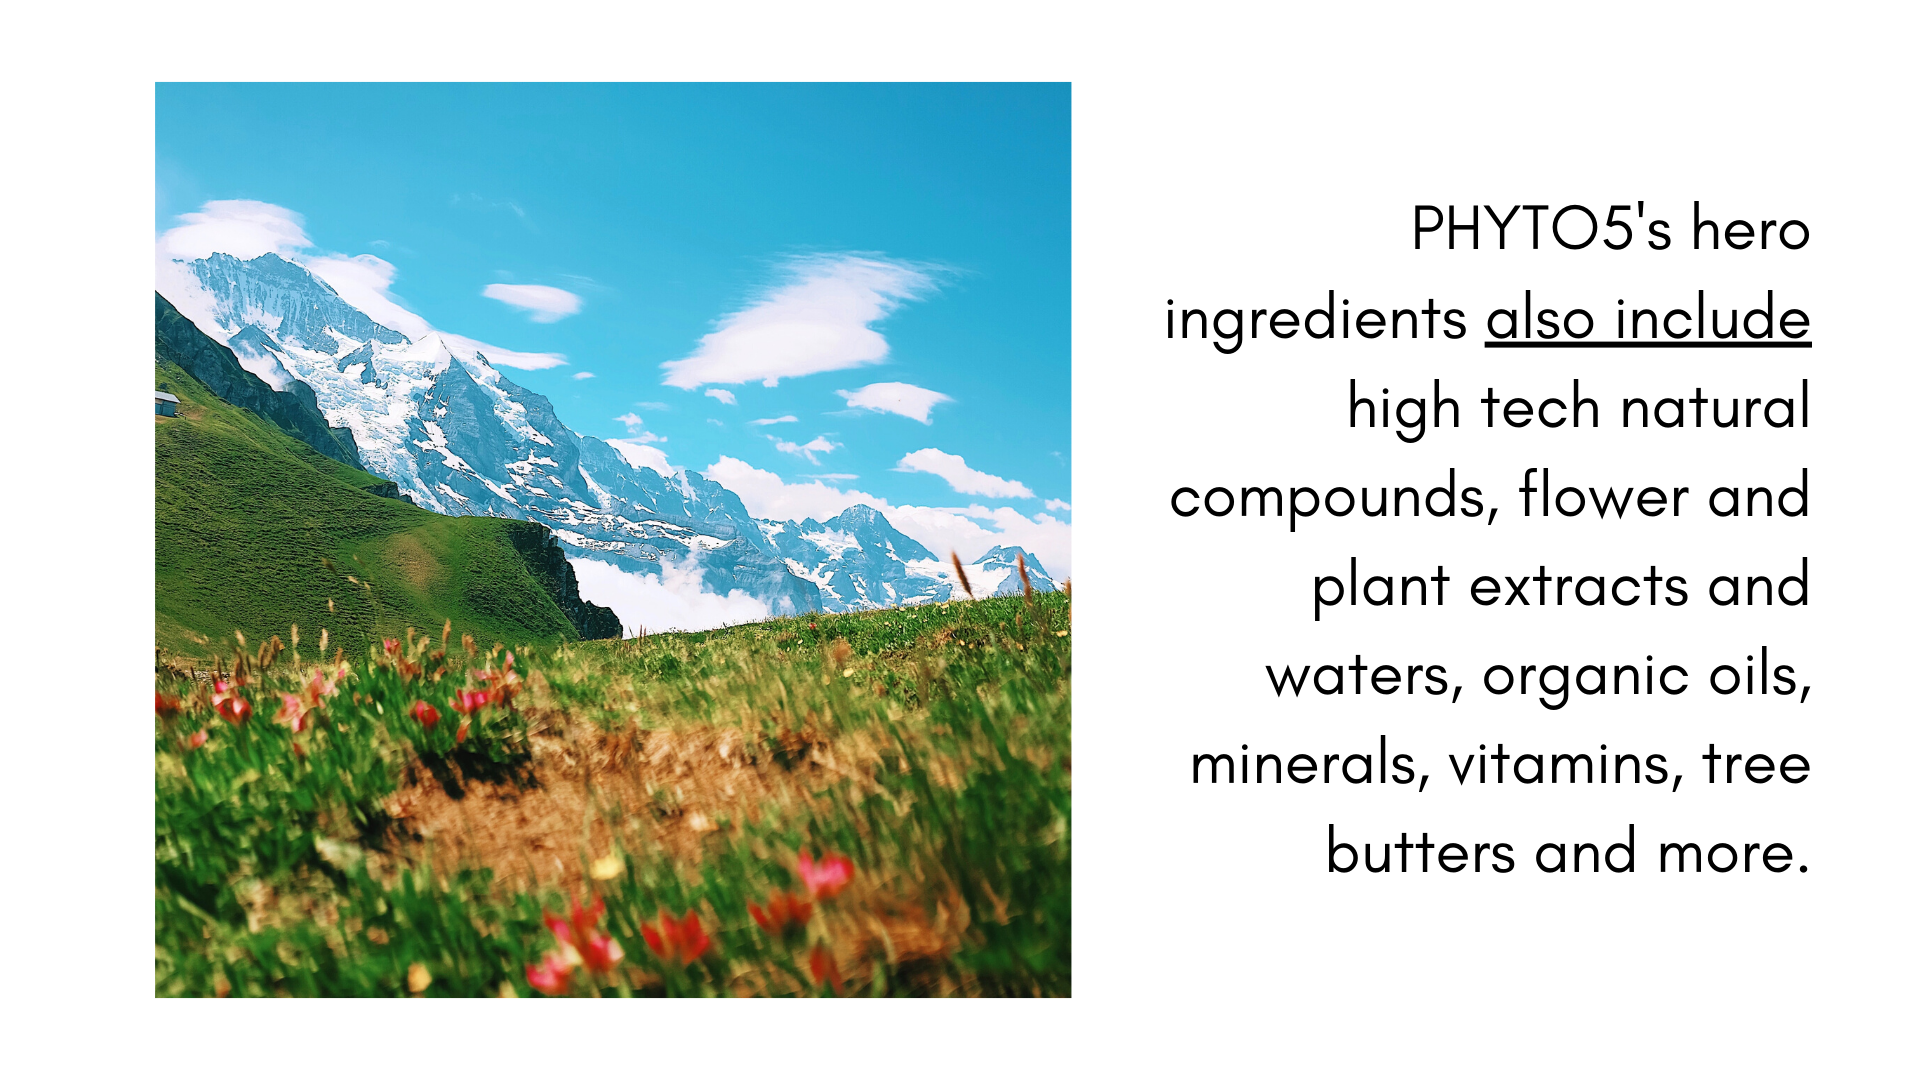 phyto5-other-hero-ingredients.png